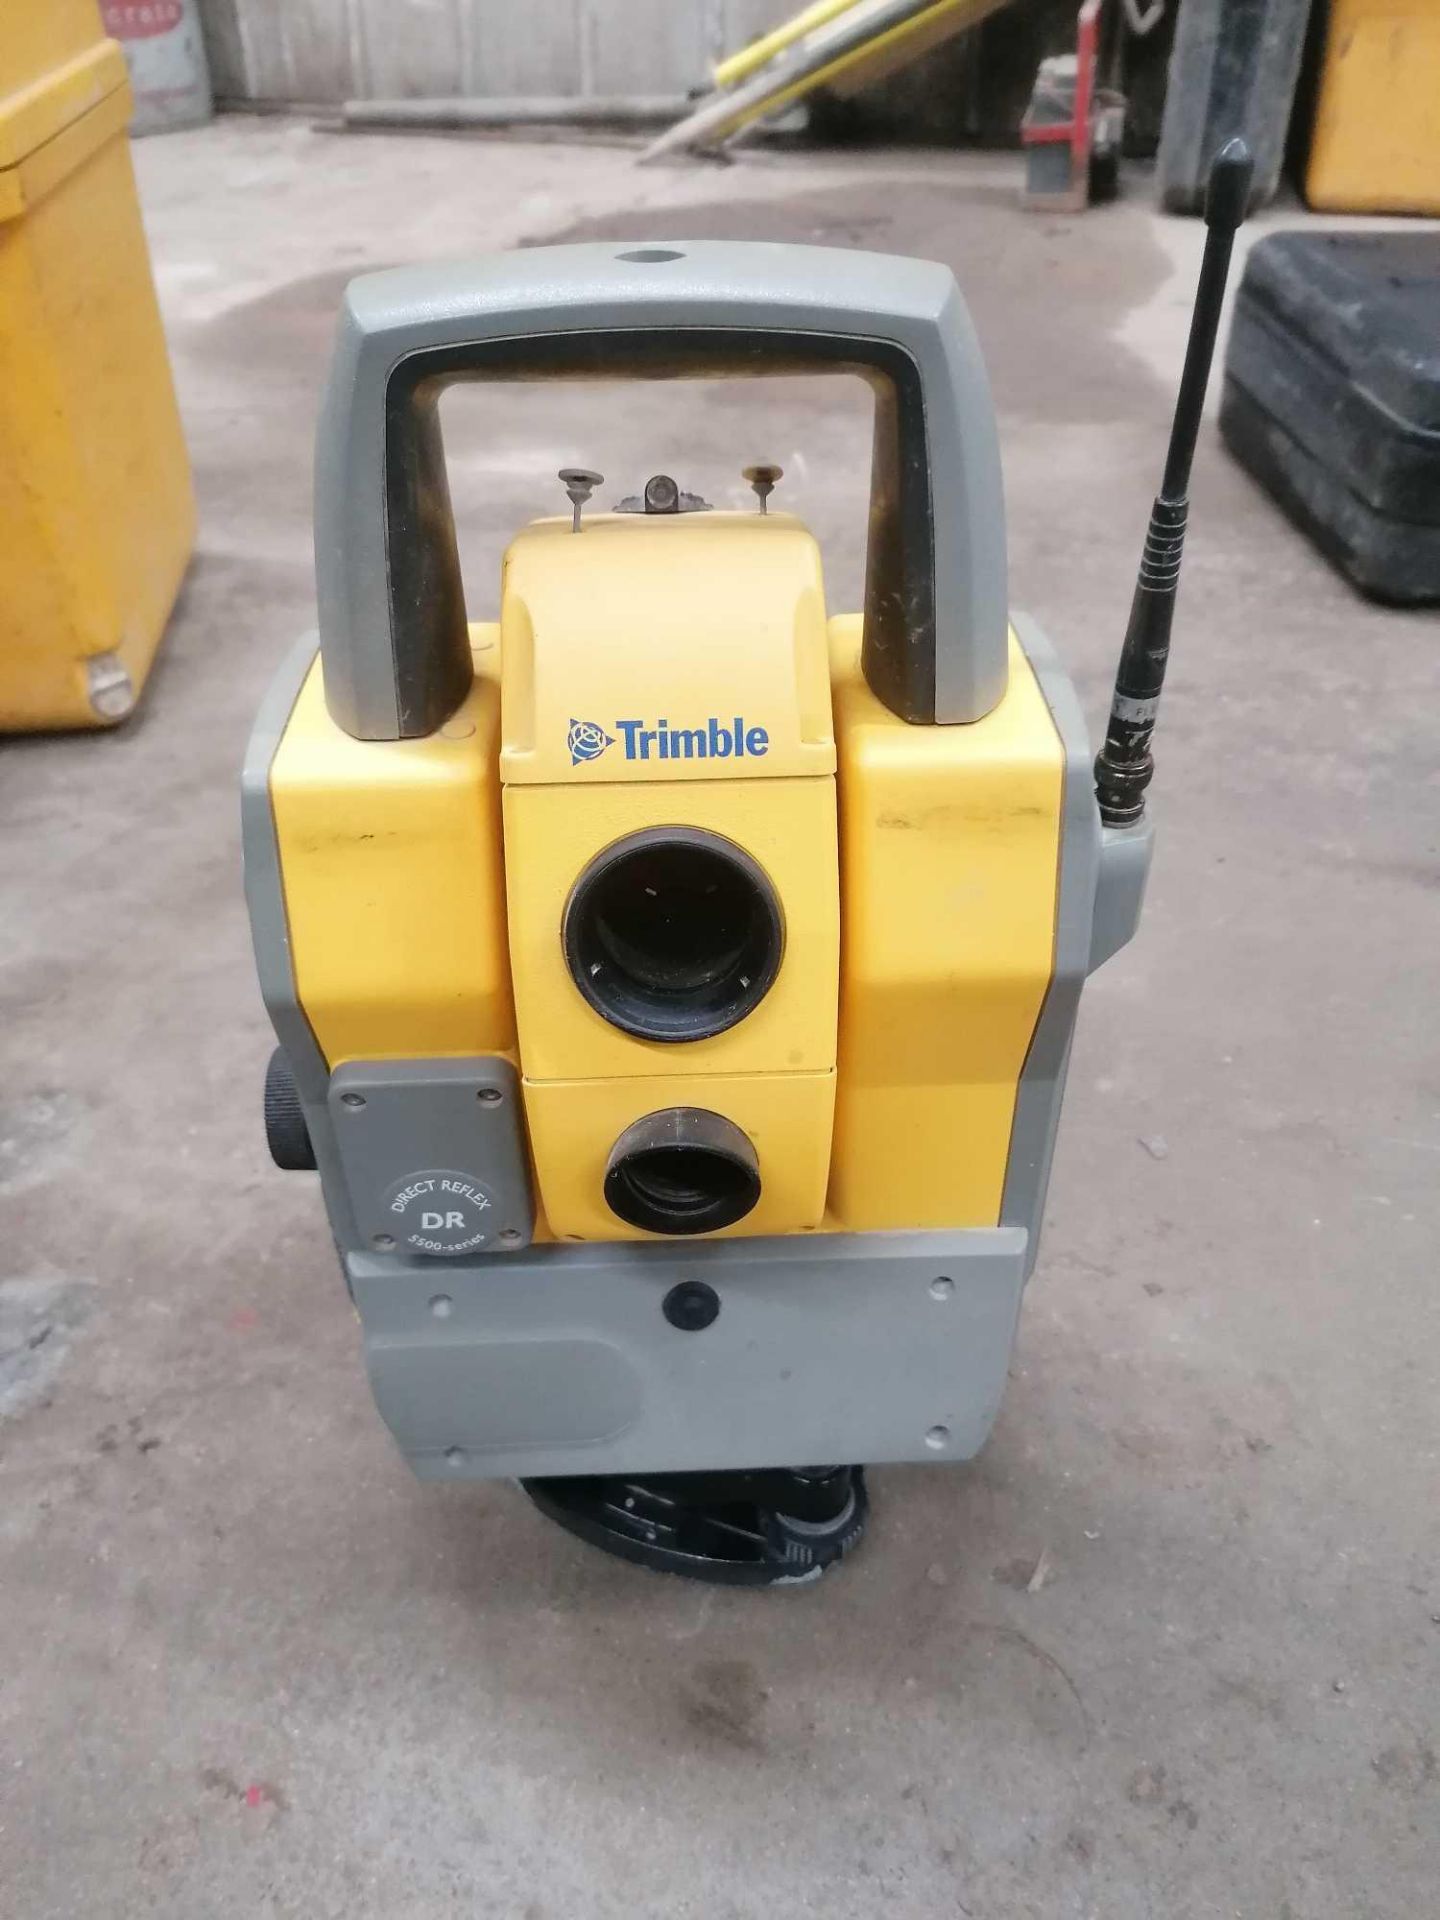 Trimble 5503 Total Station Laser, Model 5503 DR Standard, Serial # 81710369 with Attachments. - Image 2 of 20